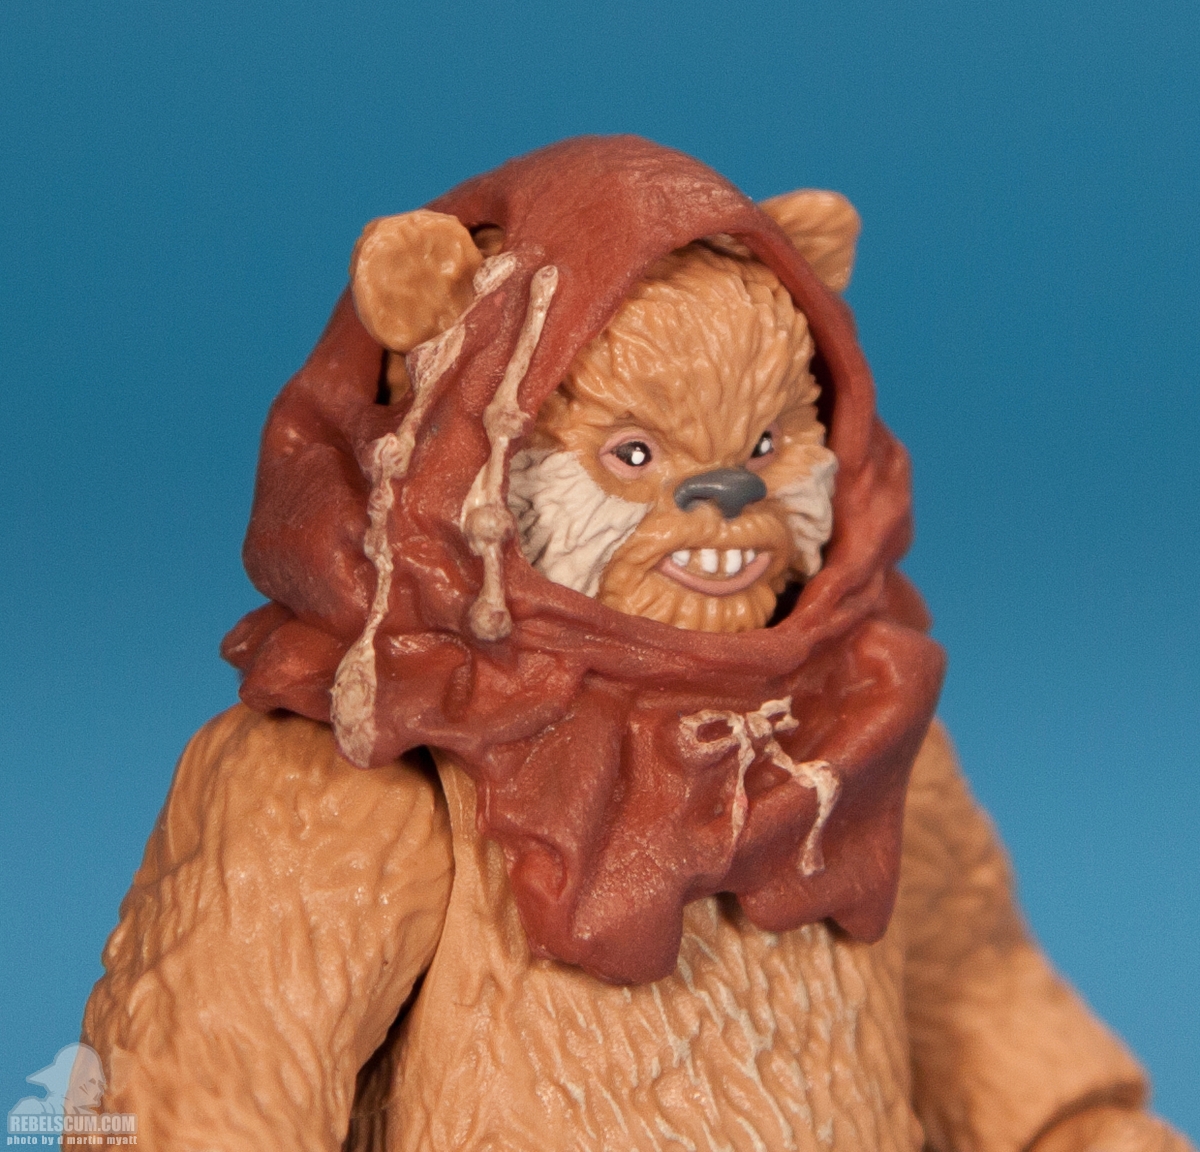 Ewok_Scouts_The_Vintage_Collection_TVC_Kmart-10.jpg